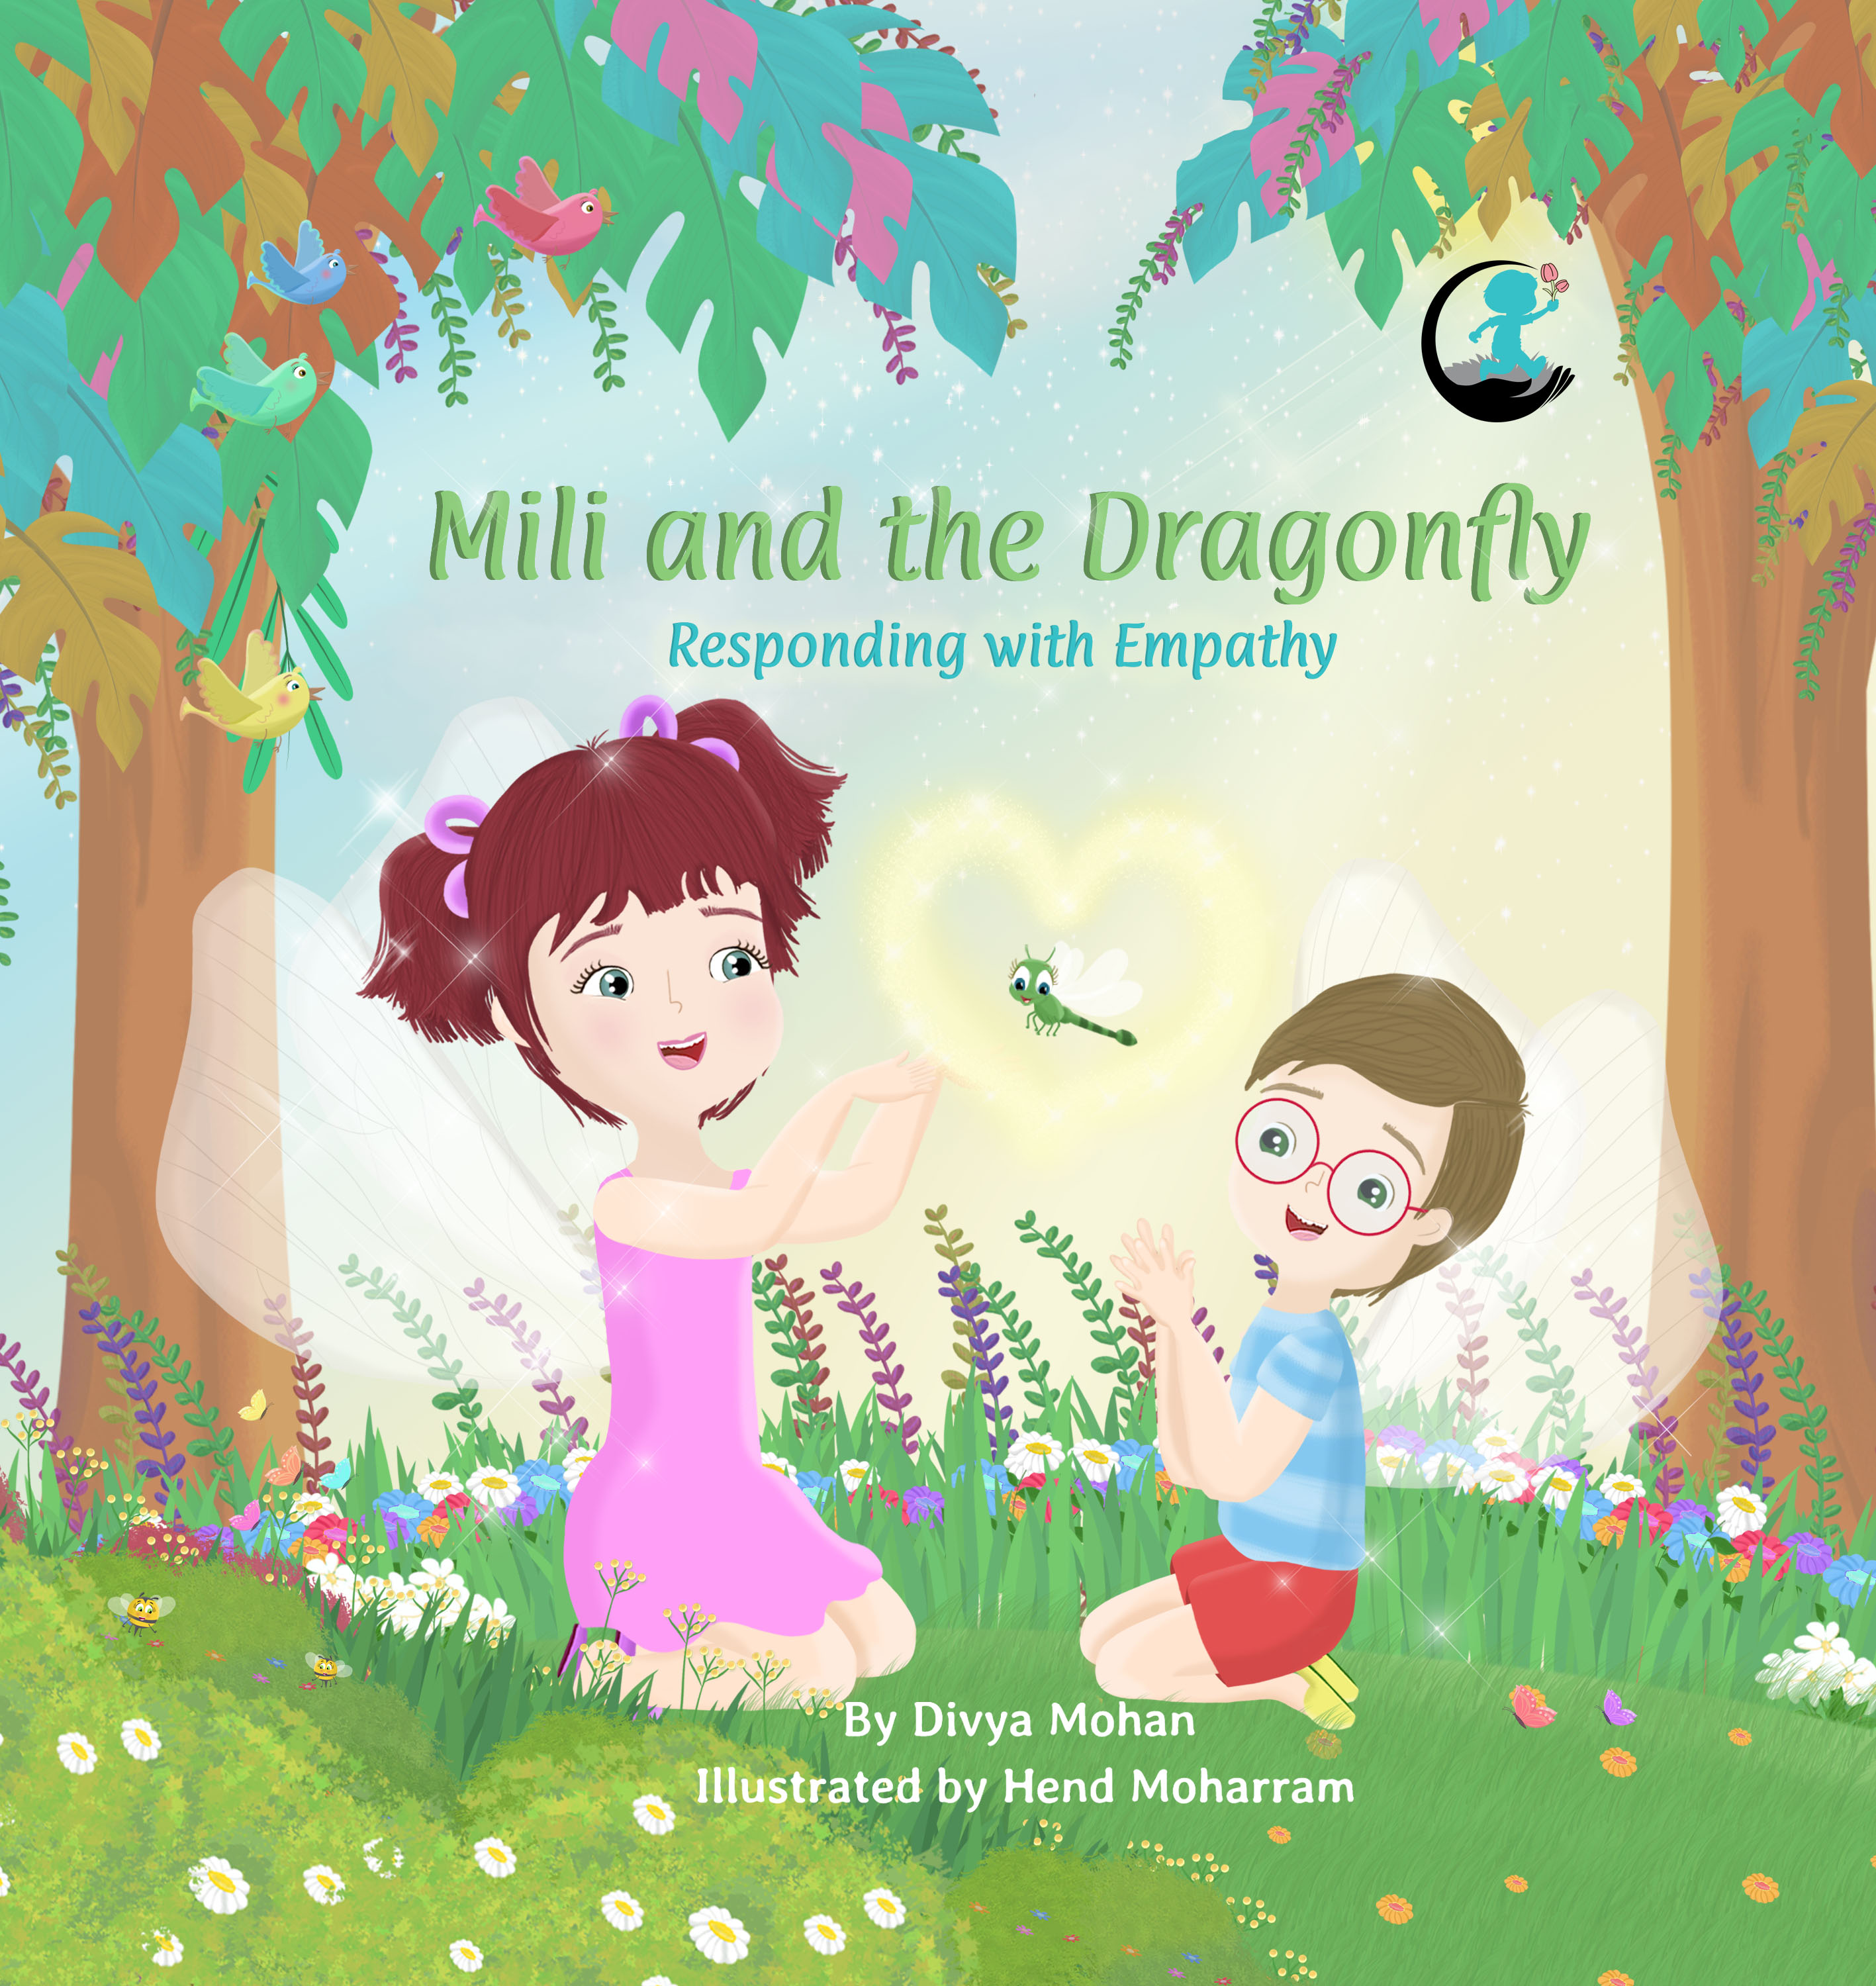 FREE: Mili and the Dragonfly by Divya Mohan